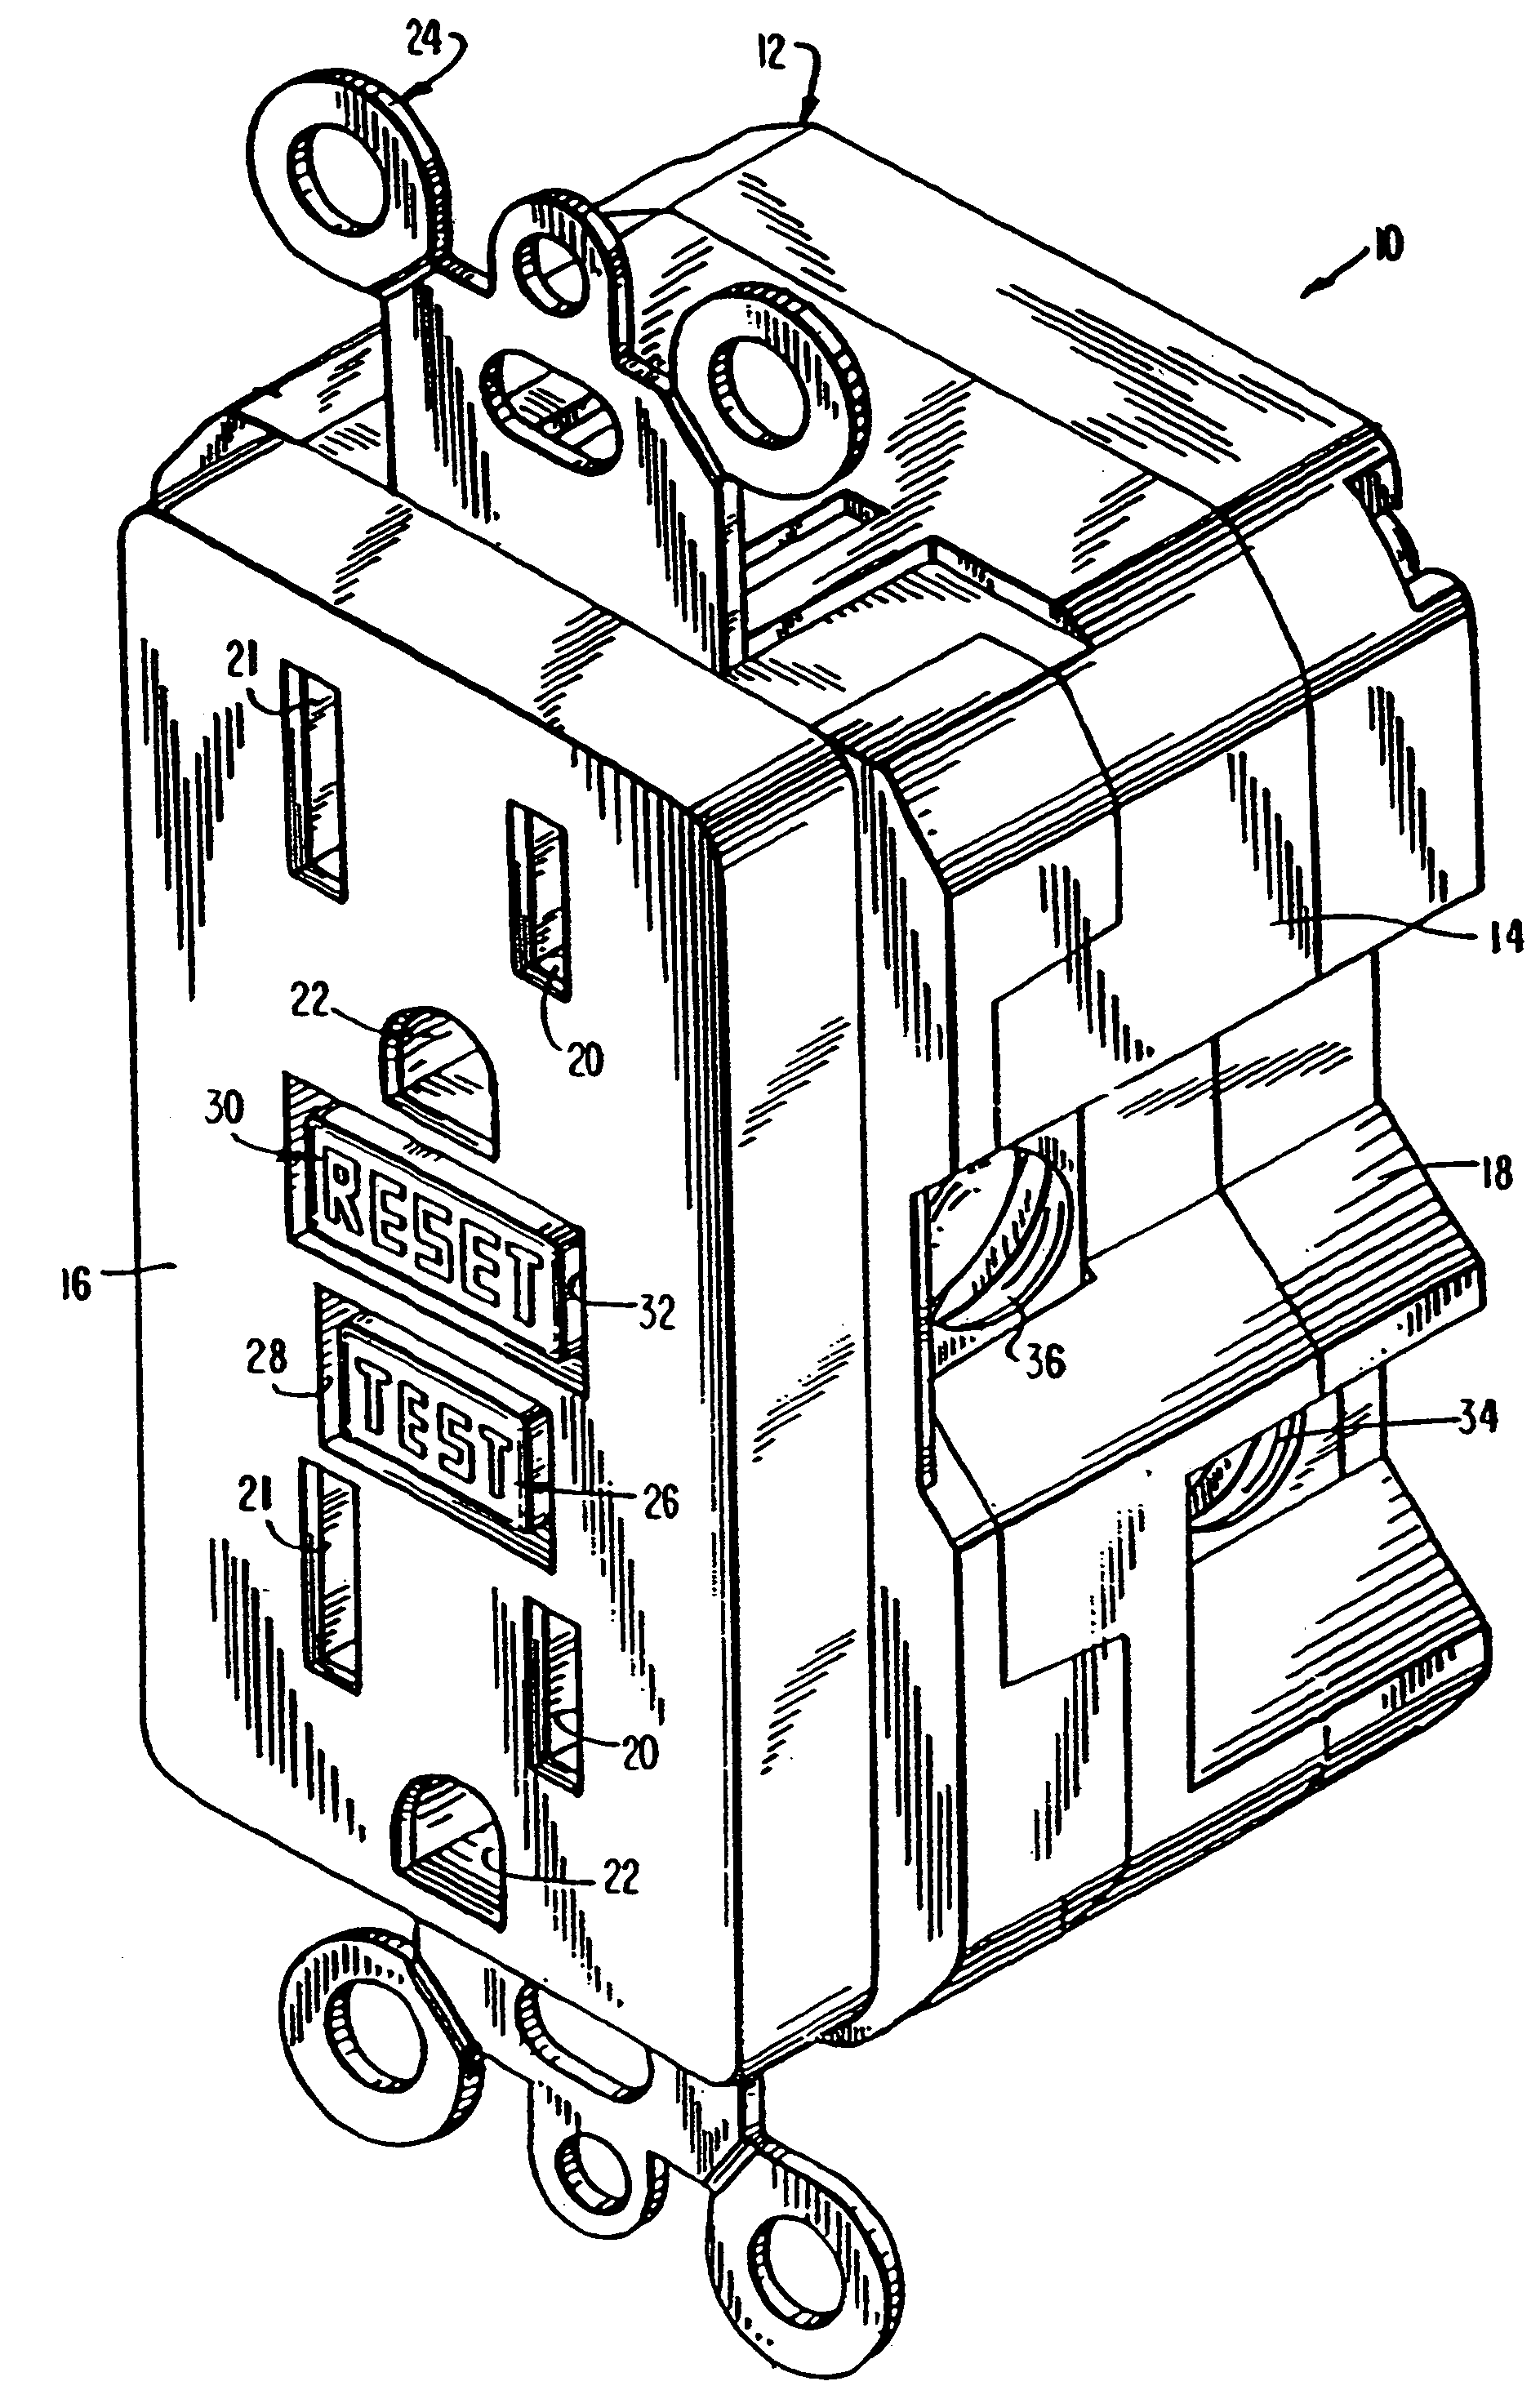 Circuit interrupting device with reverse wiring protection